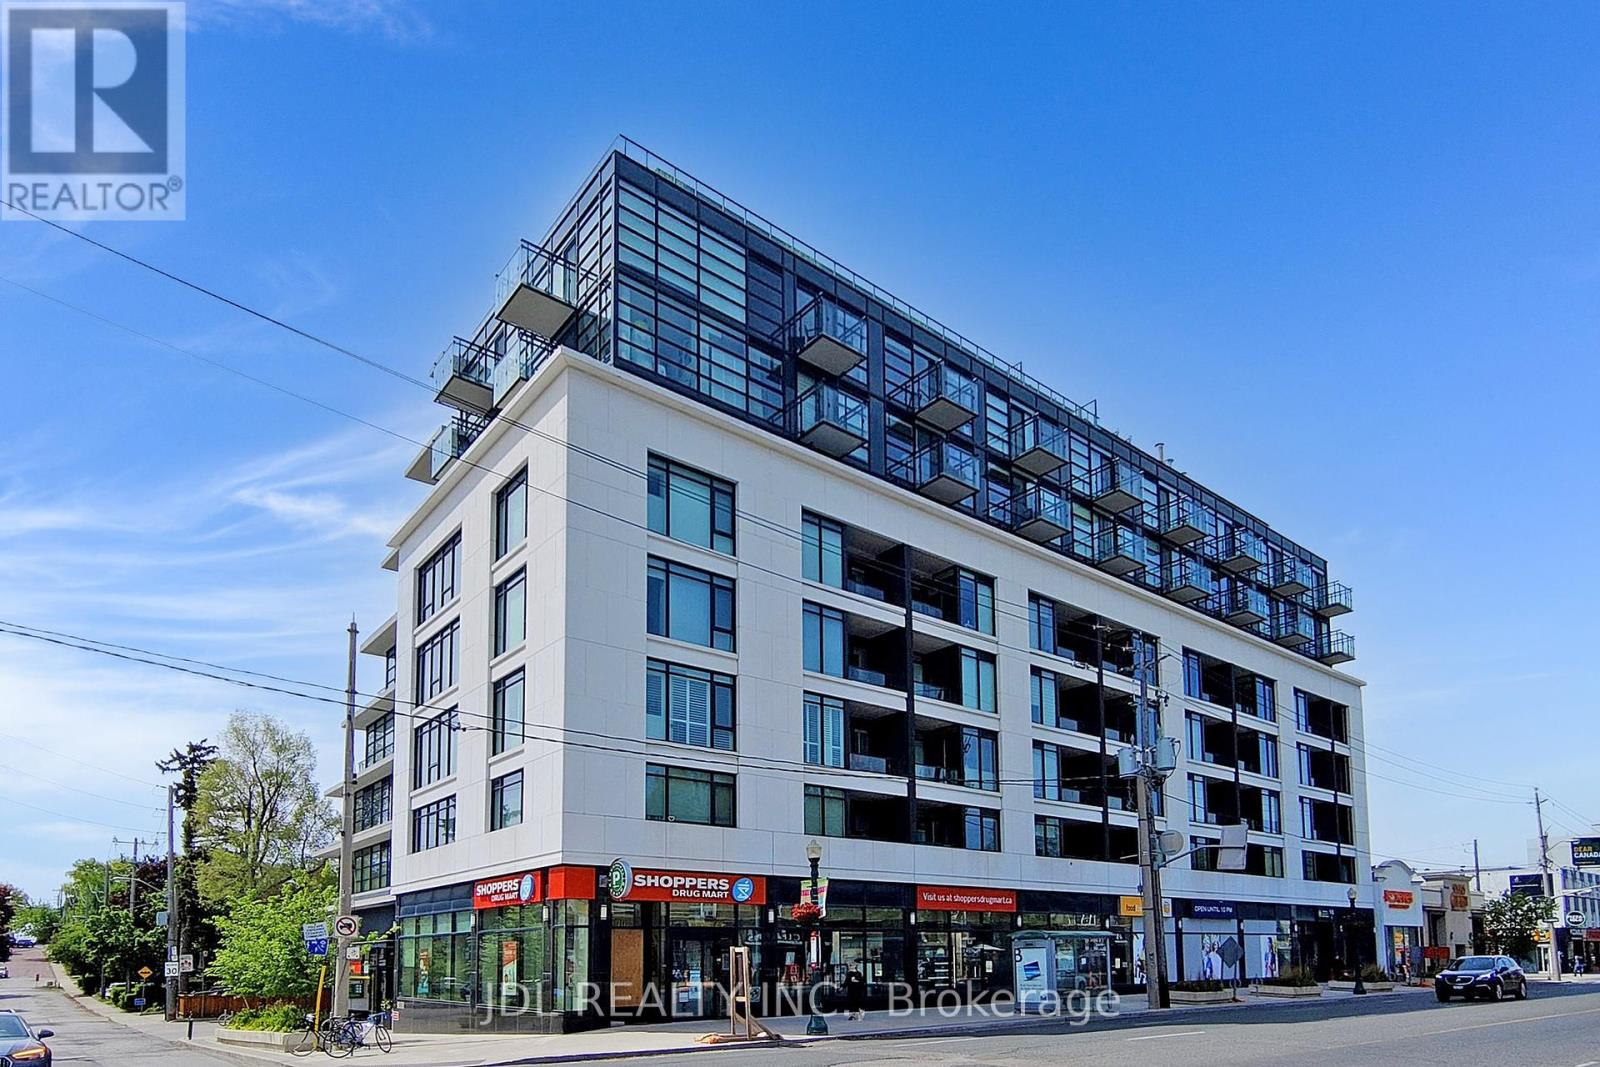 #316 -170 CHILTERN HILL RD located in Toronto, Ontario